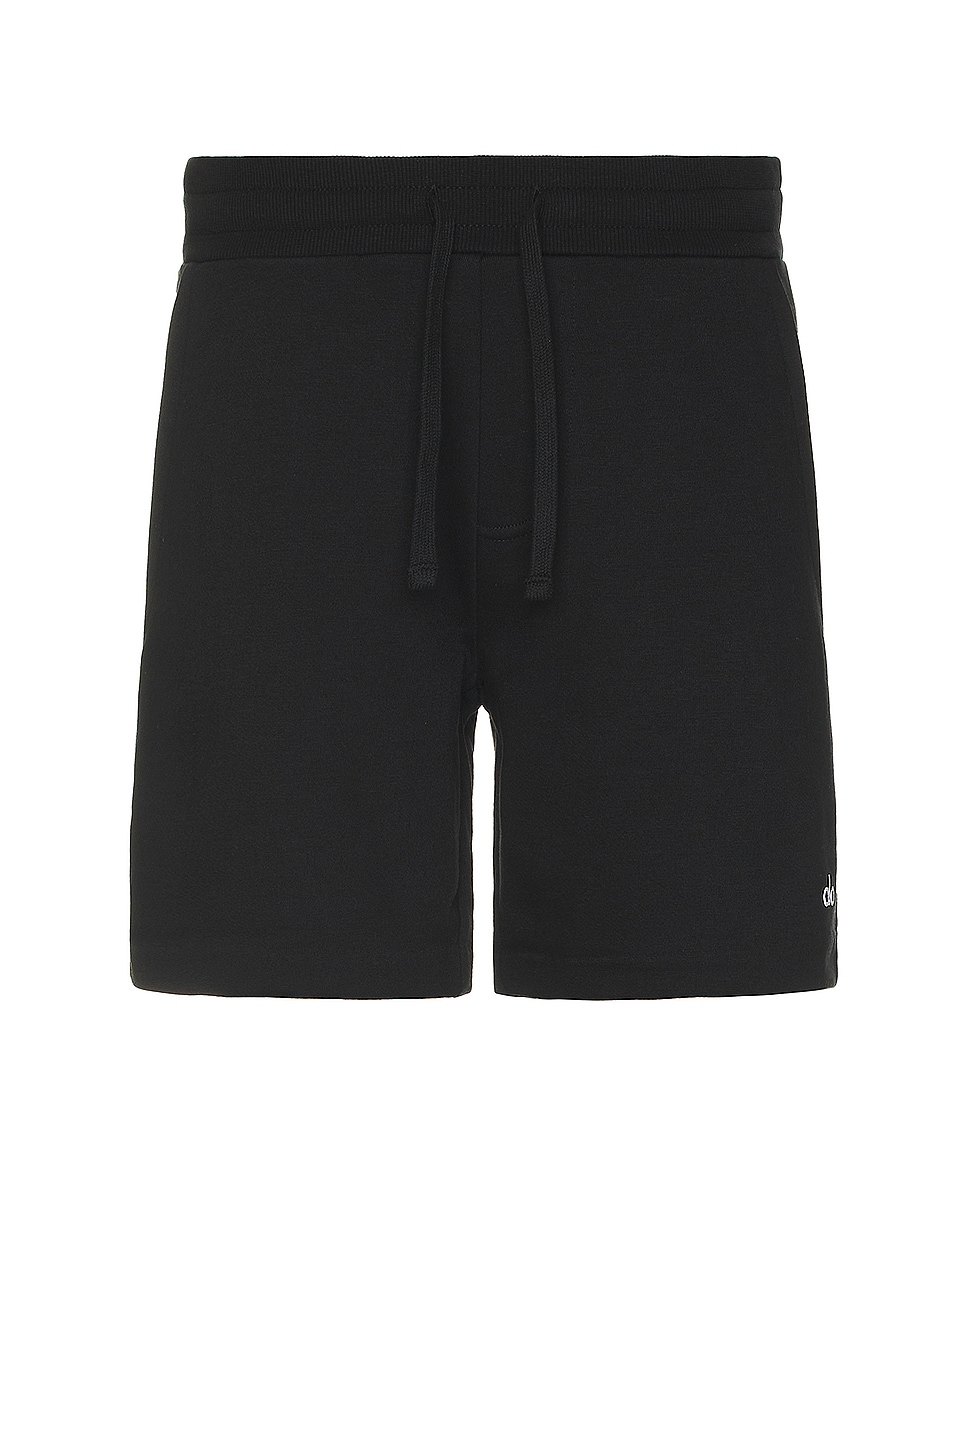 Image 1 of alo Chill Shorts in Black